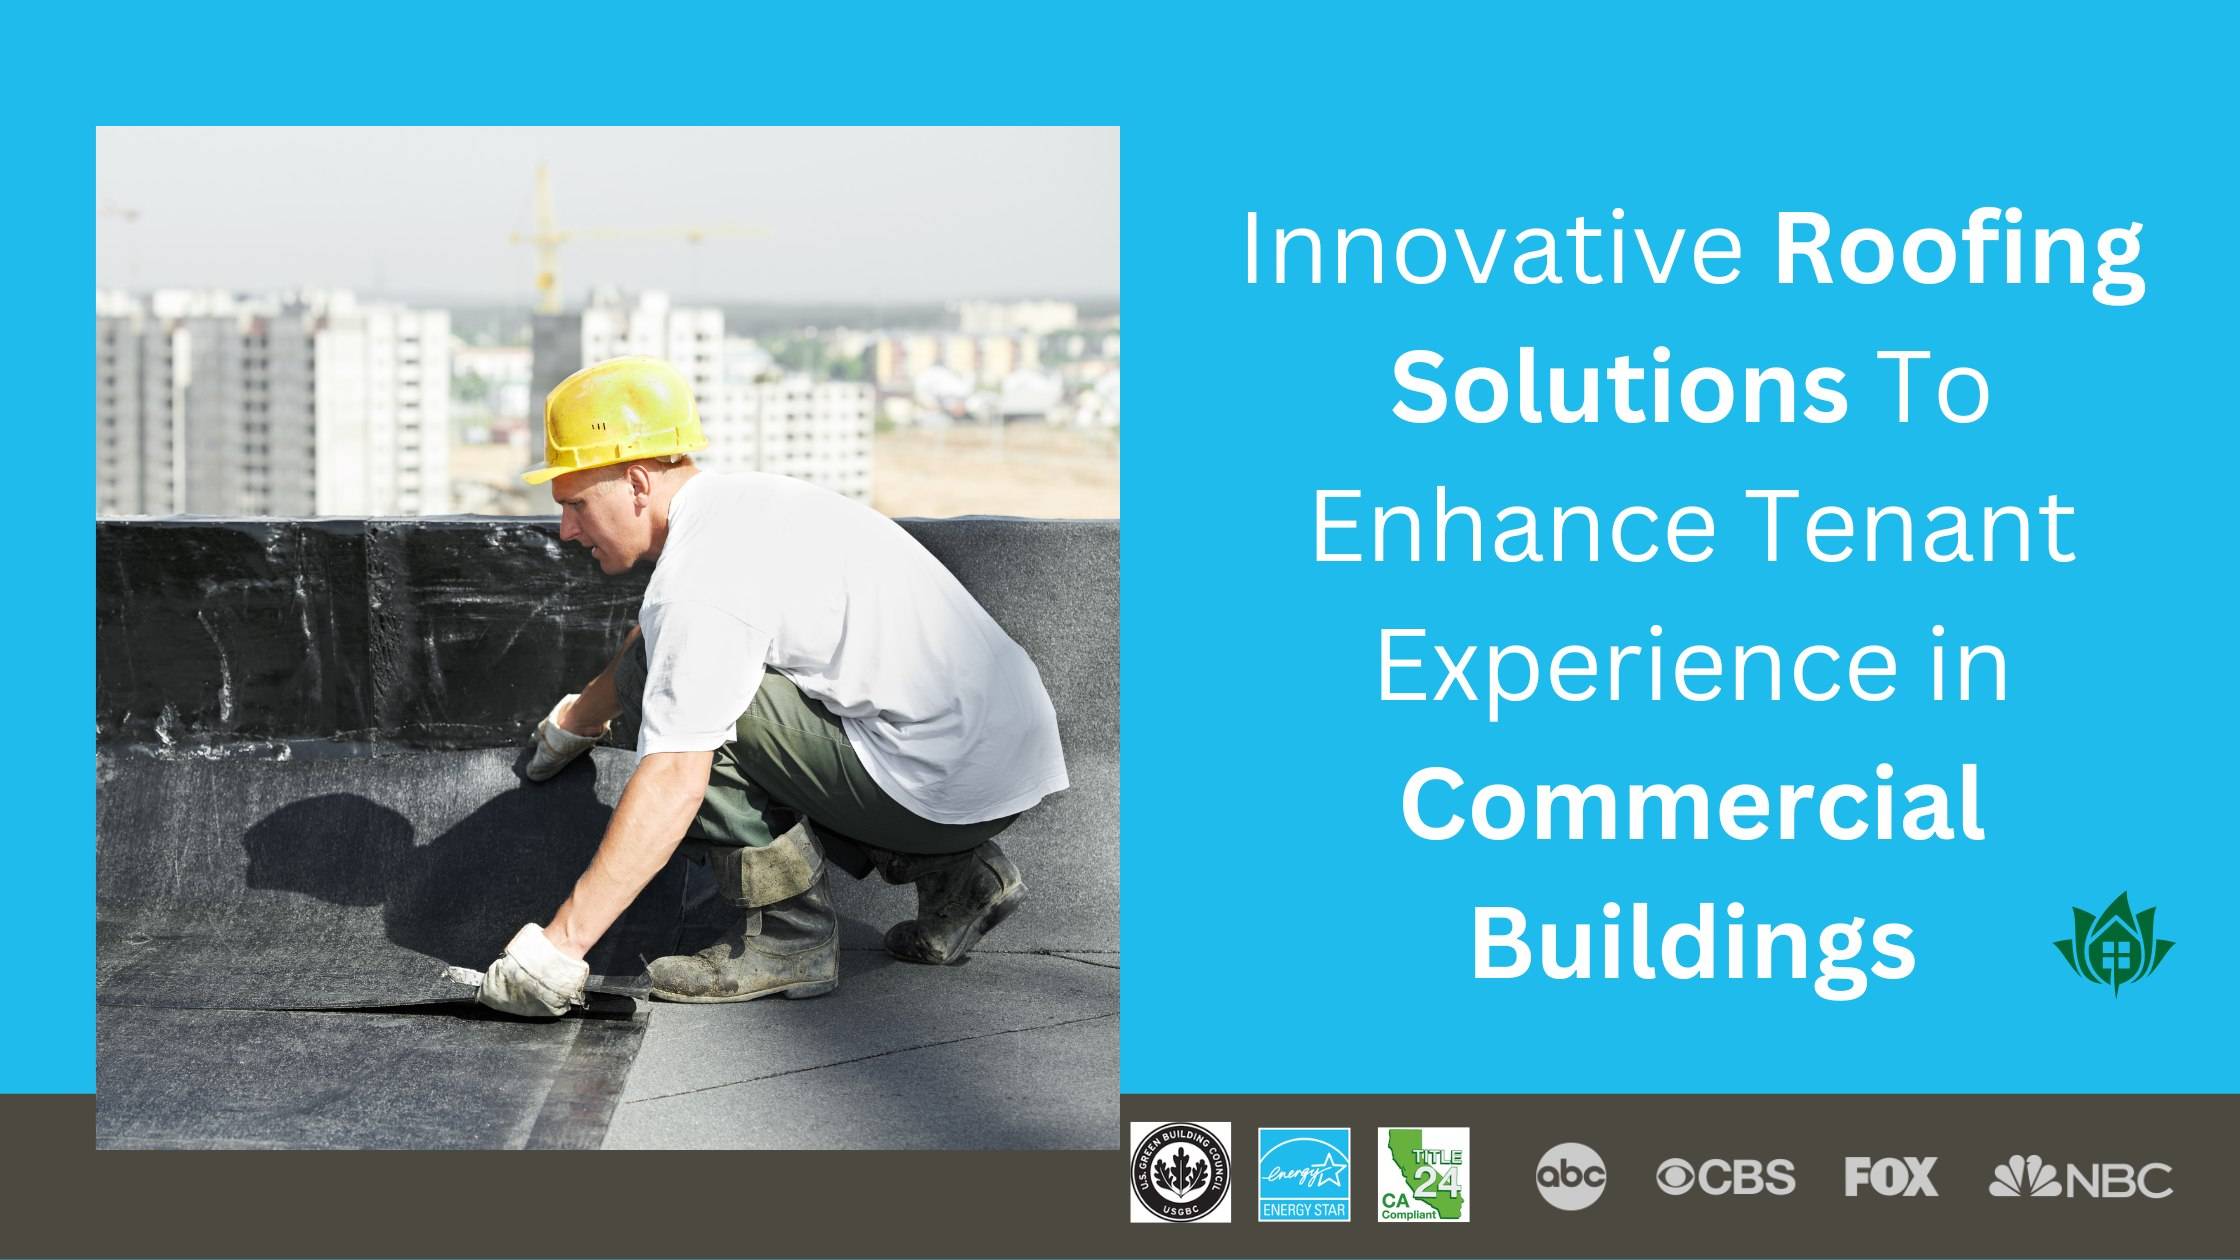 Redefining Skies: How Innovative Roofing Solutions Enhance Tenant Experience in Commercial Buildings